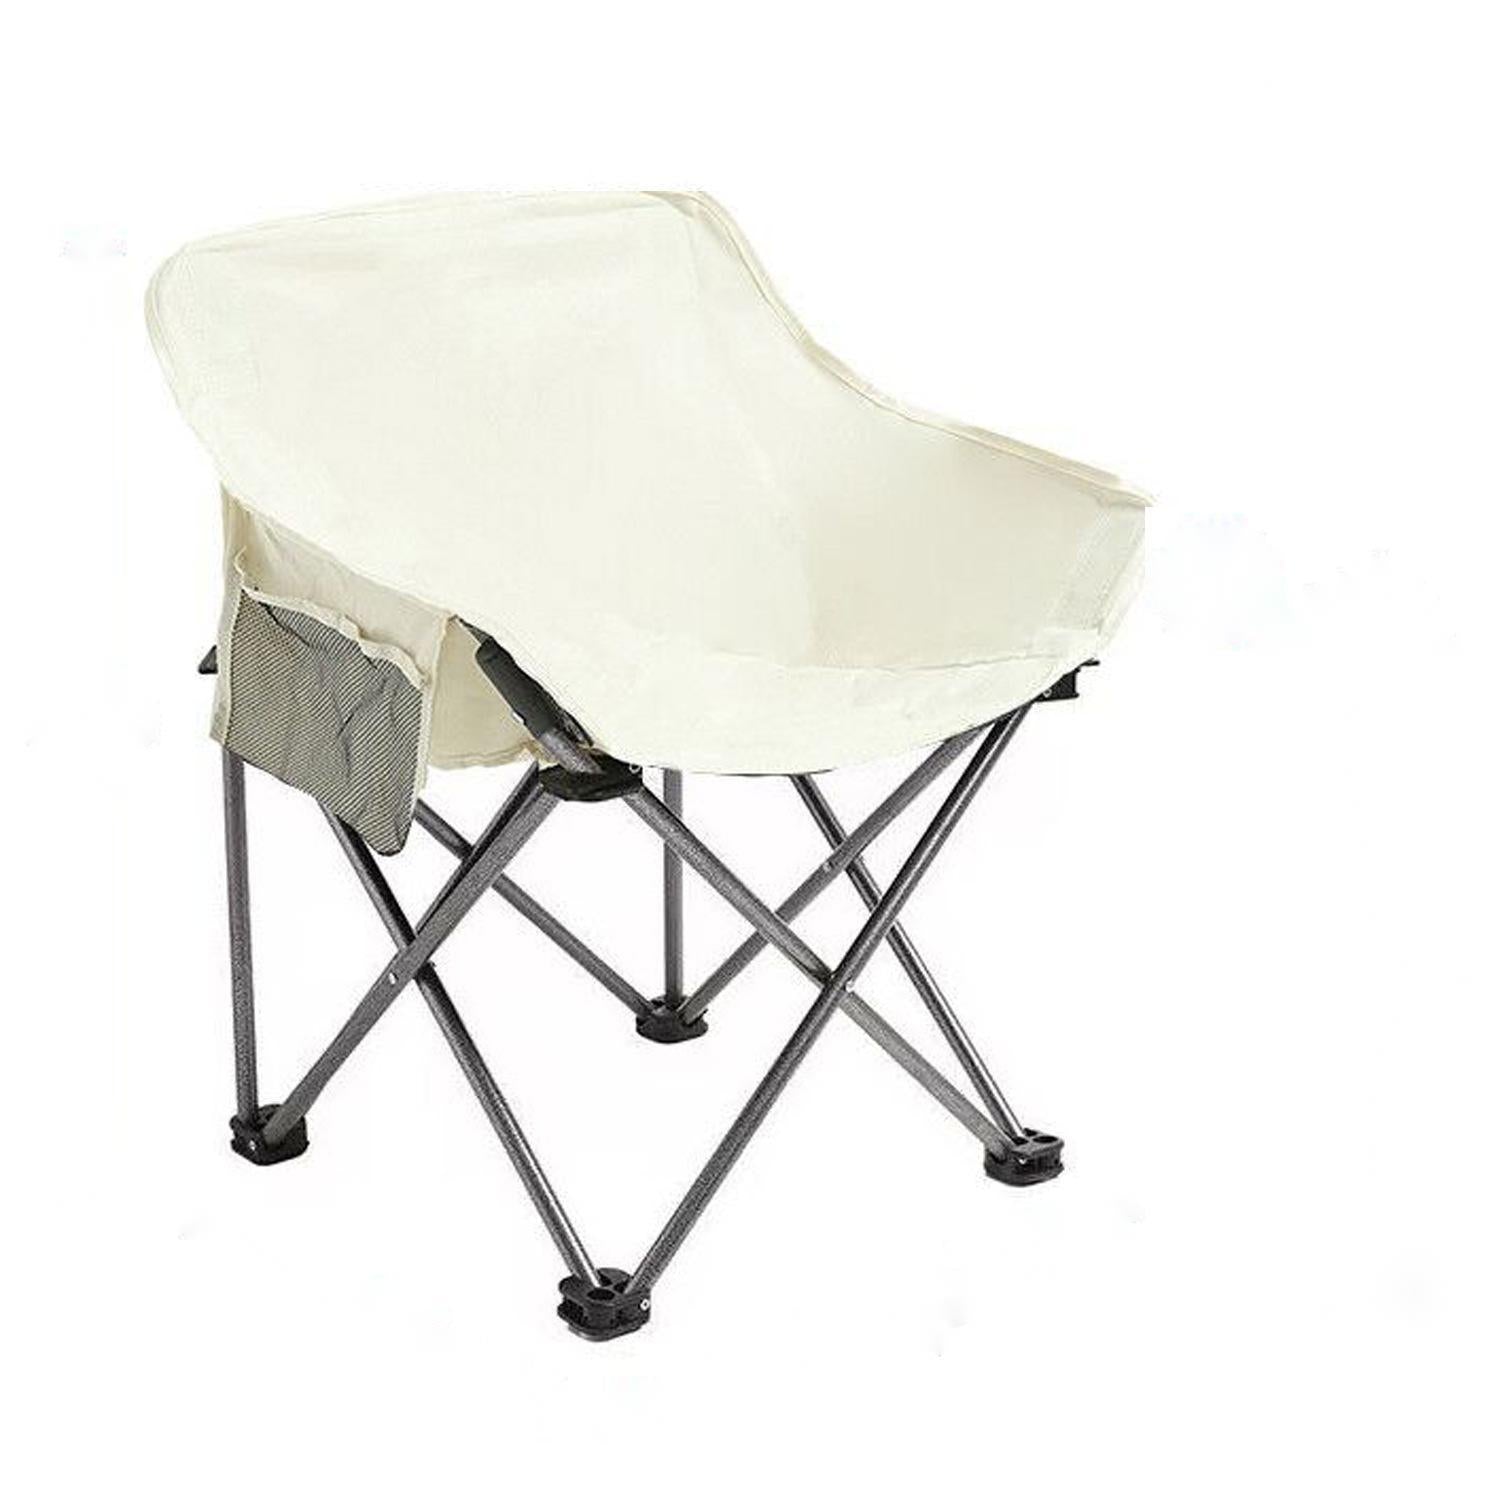 White Oxford Versatile Moon Chair Portable For Outdoor And Indoor Use_4Eb973Af Ffd9 4352 B883 A22Ebdd65B80